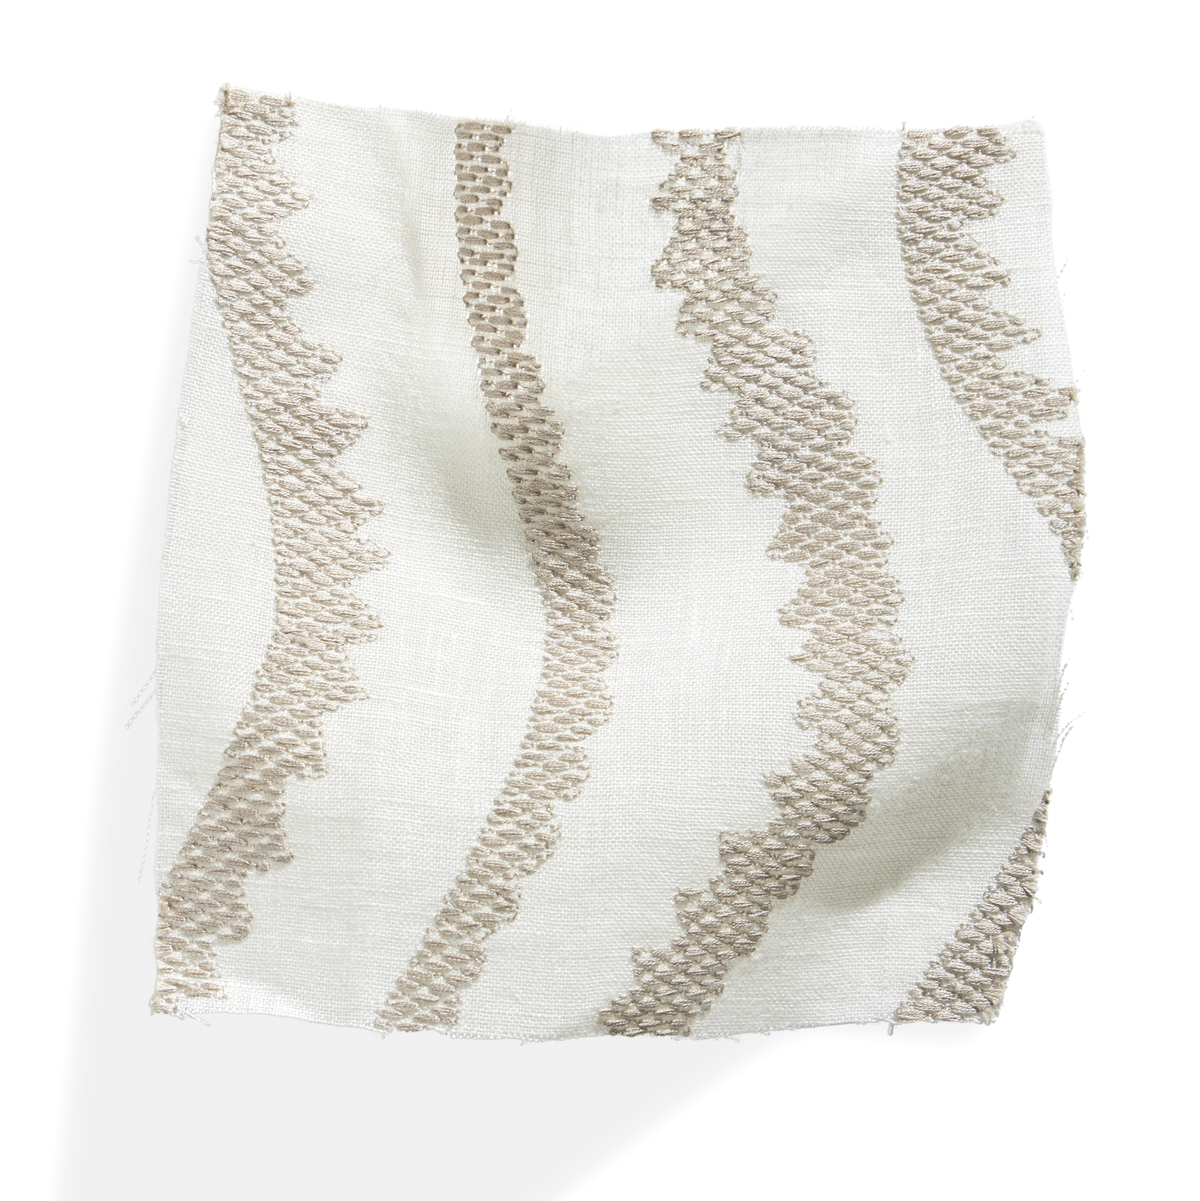 Notched Vines Fabric in Ivory/Gray